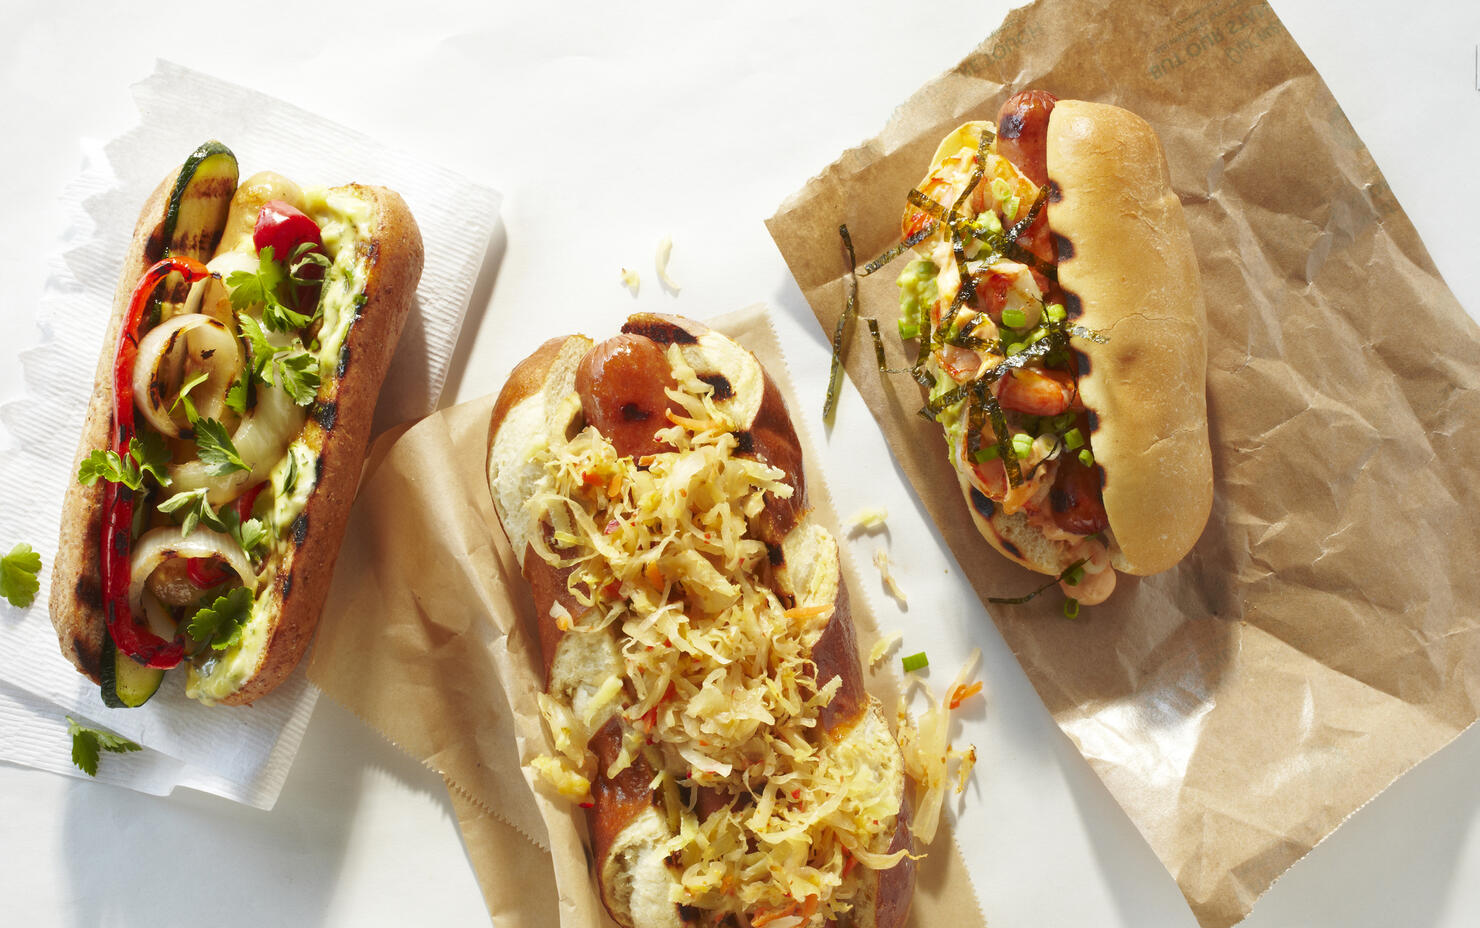 Spread of Three Types of Hot Dogs